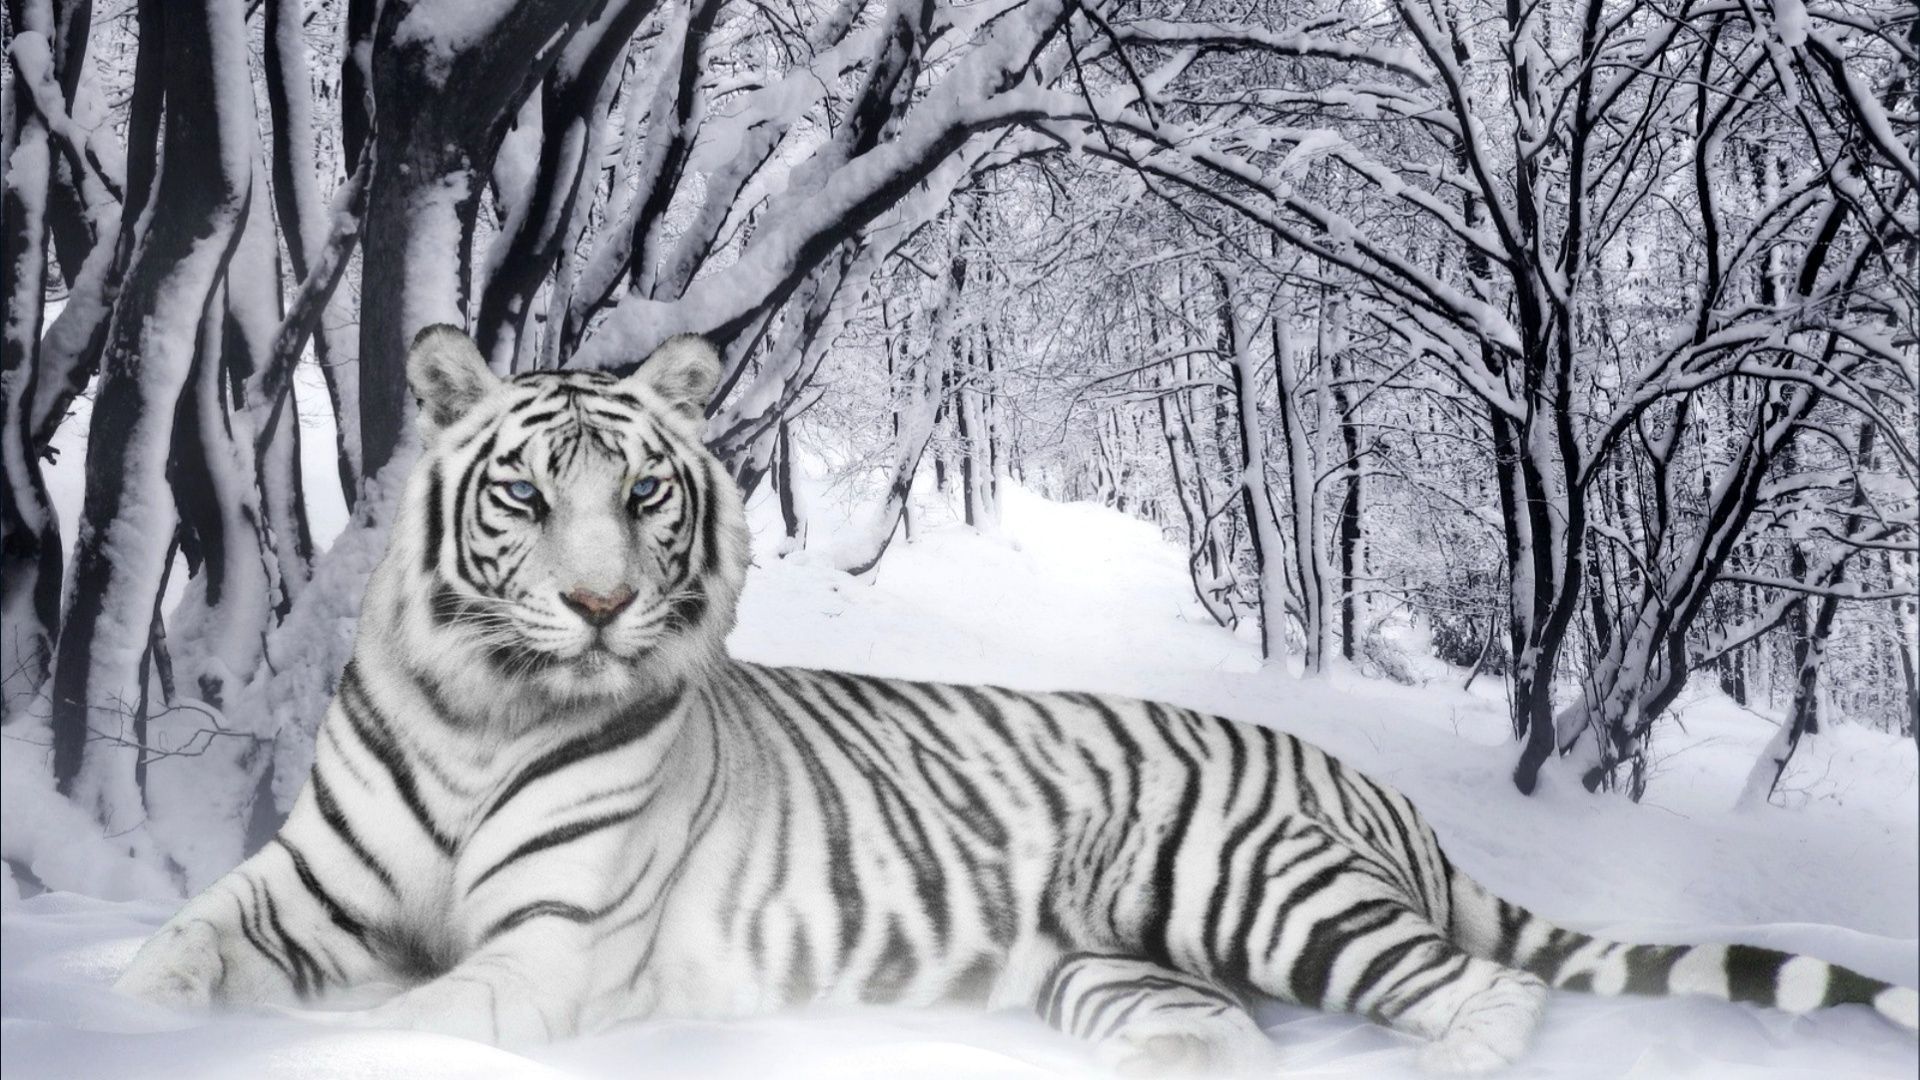 White Tiger Computer Wallpapers, Desktop Backgrounds 1920x1080